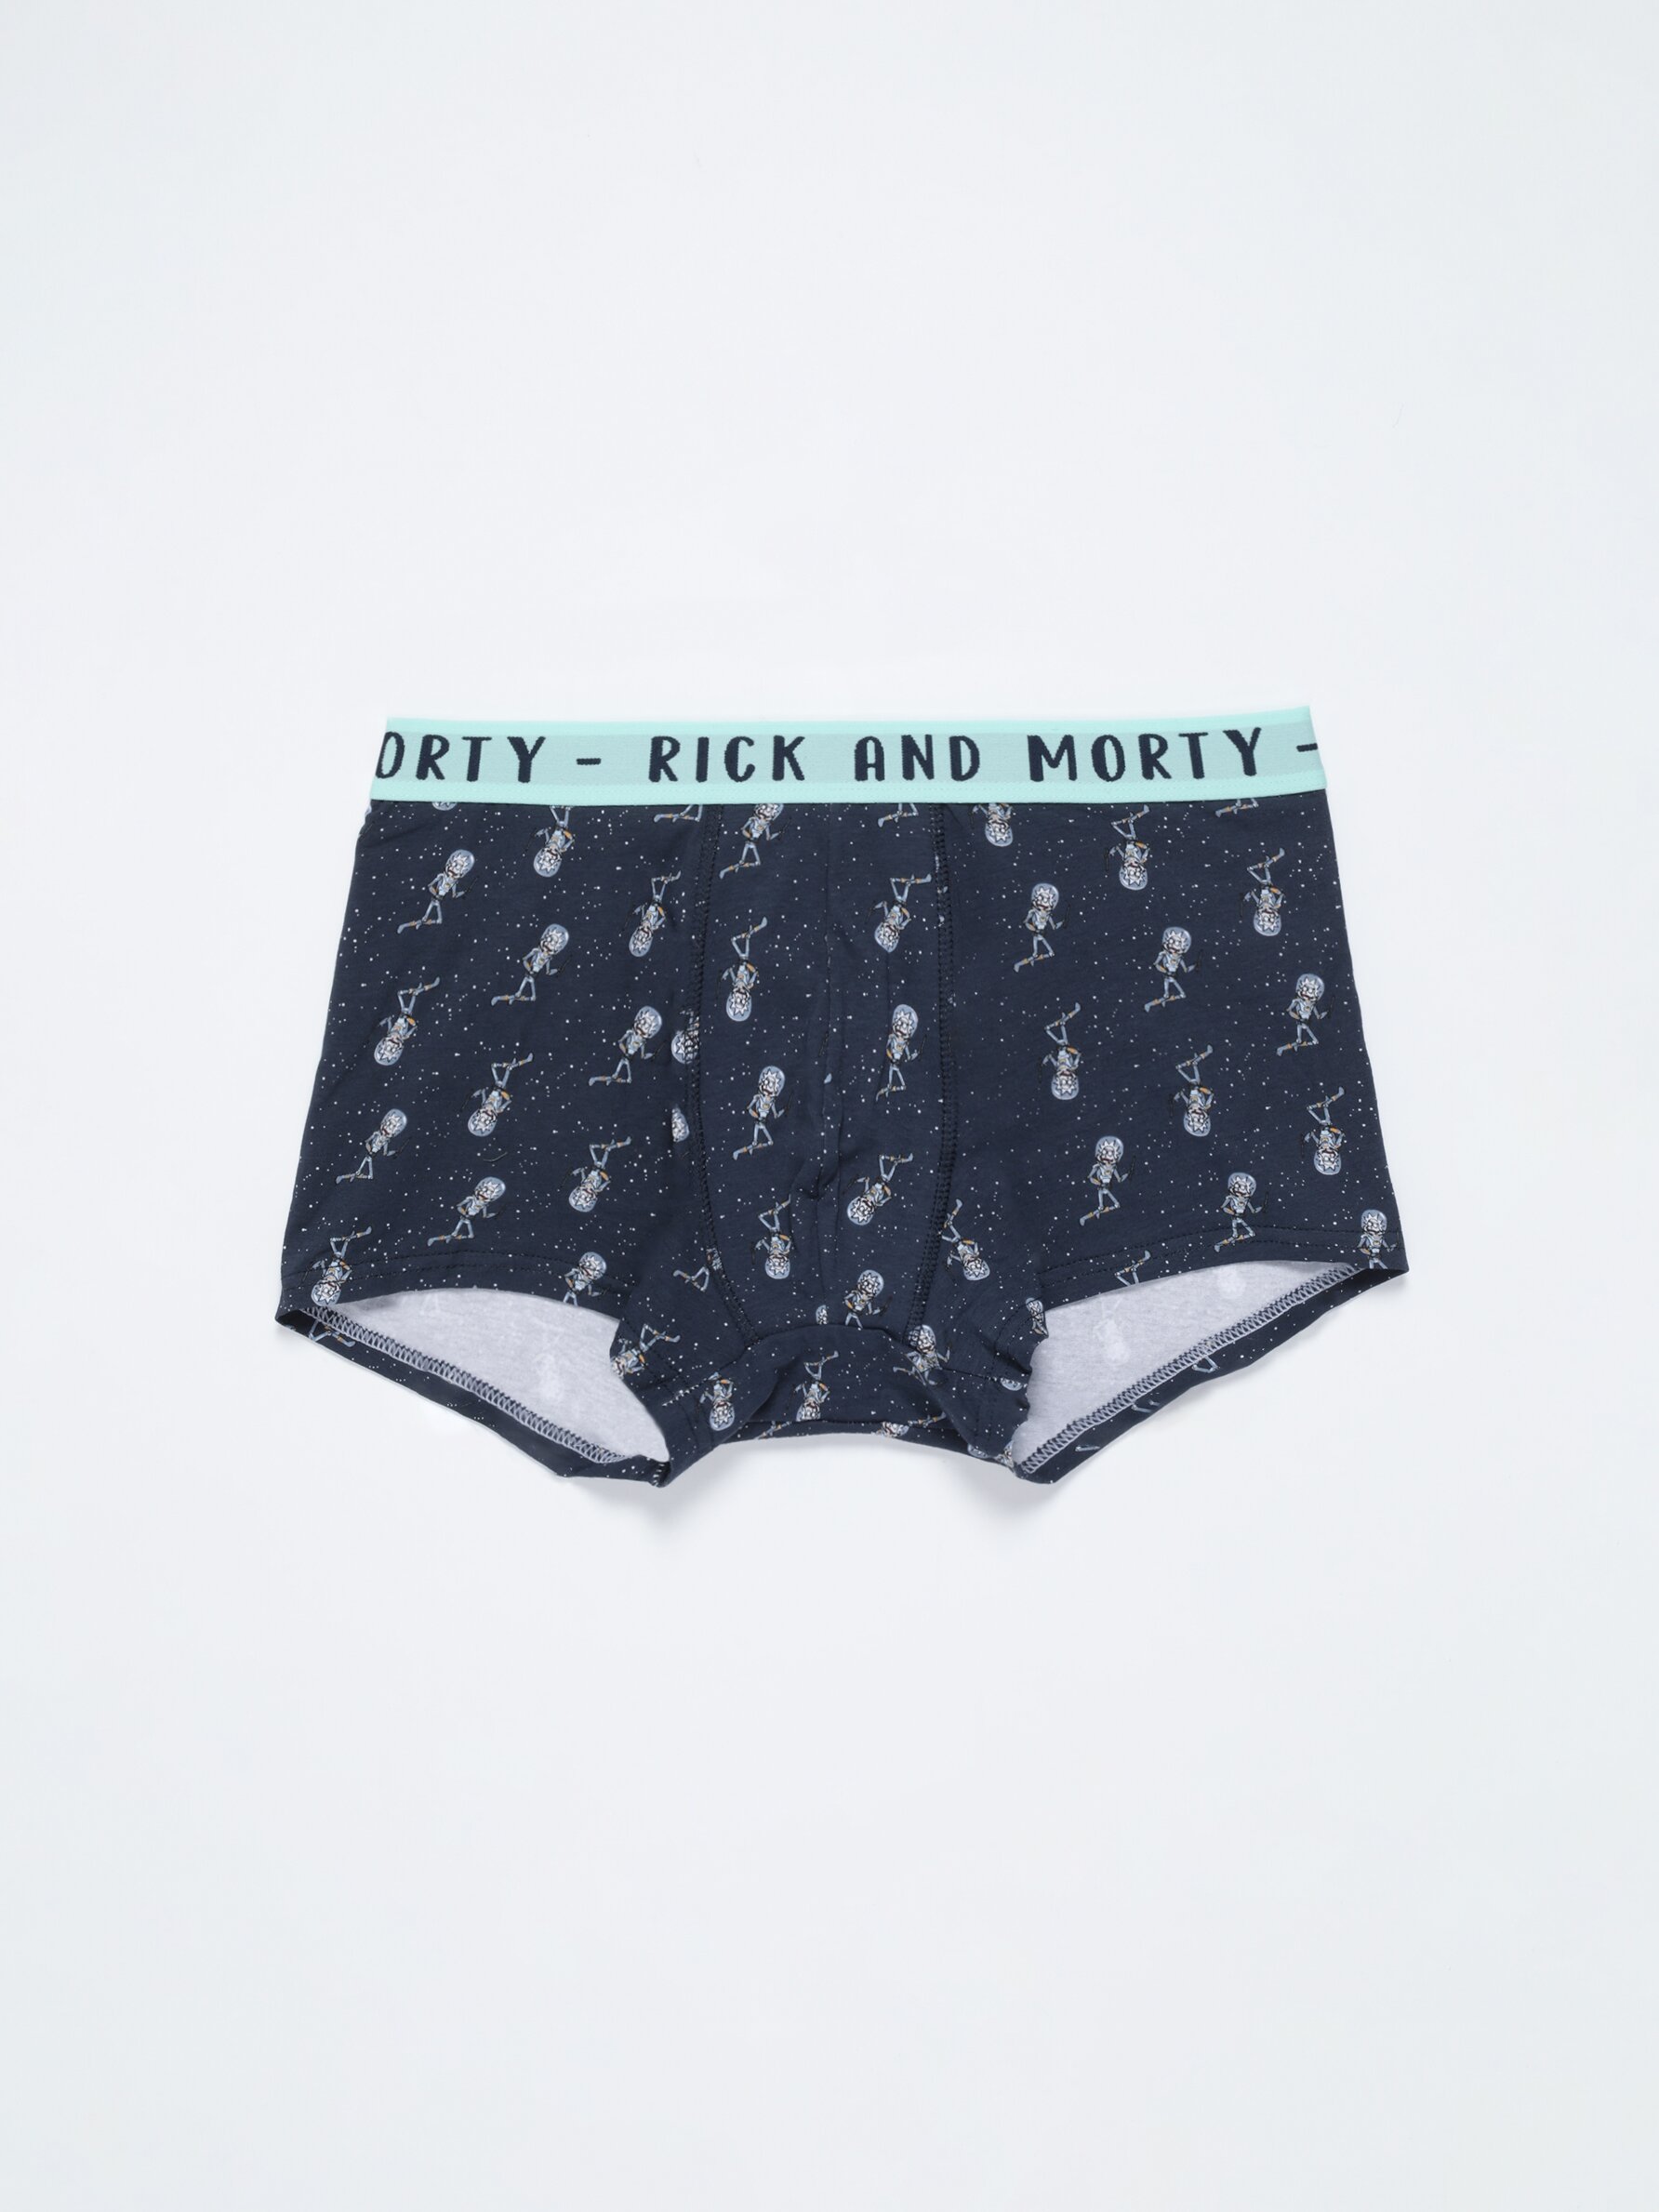 Pack of 2 pairs of Rick & Morty ™ & © Cartoon Network boxers